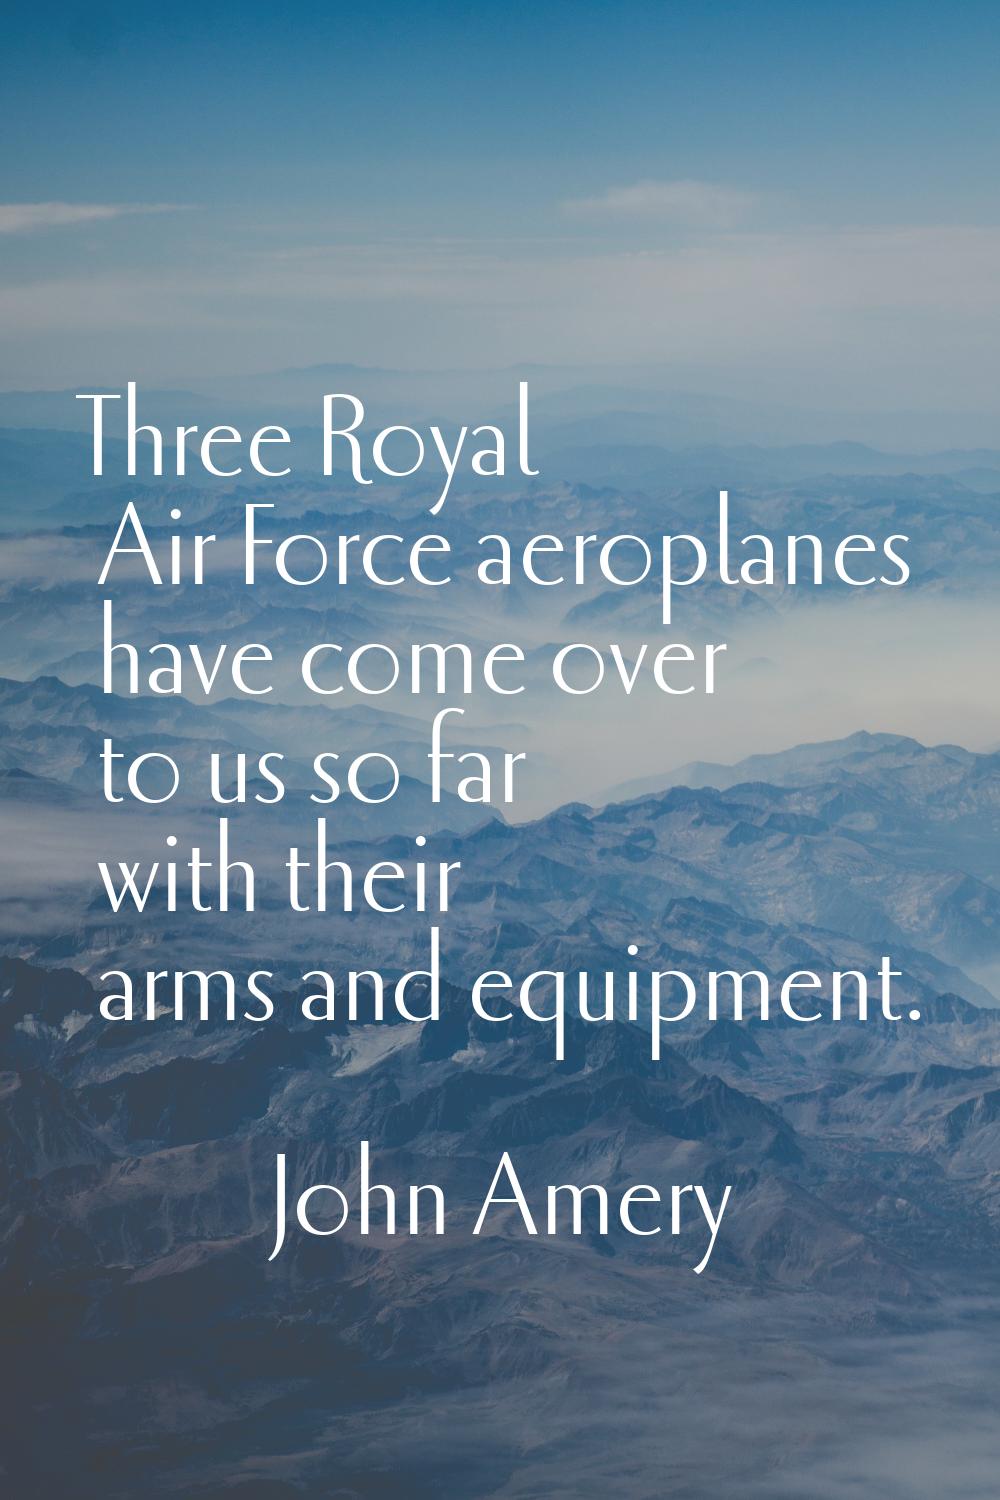 Three Royal Air Force aeroplanes have come over to us so far with their arms and equipment.